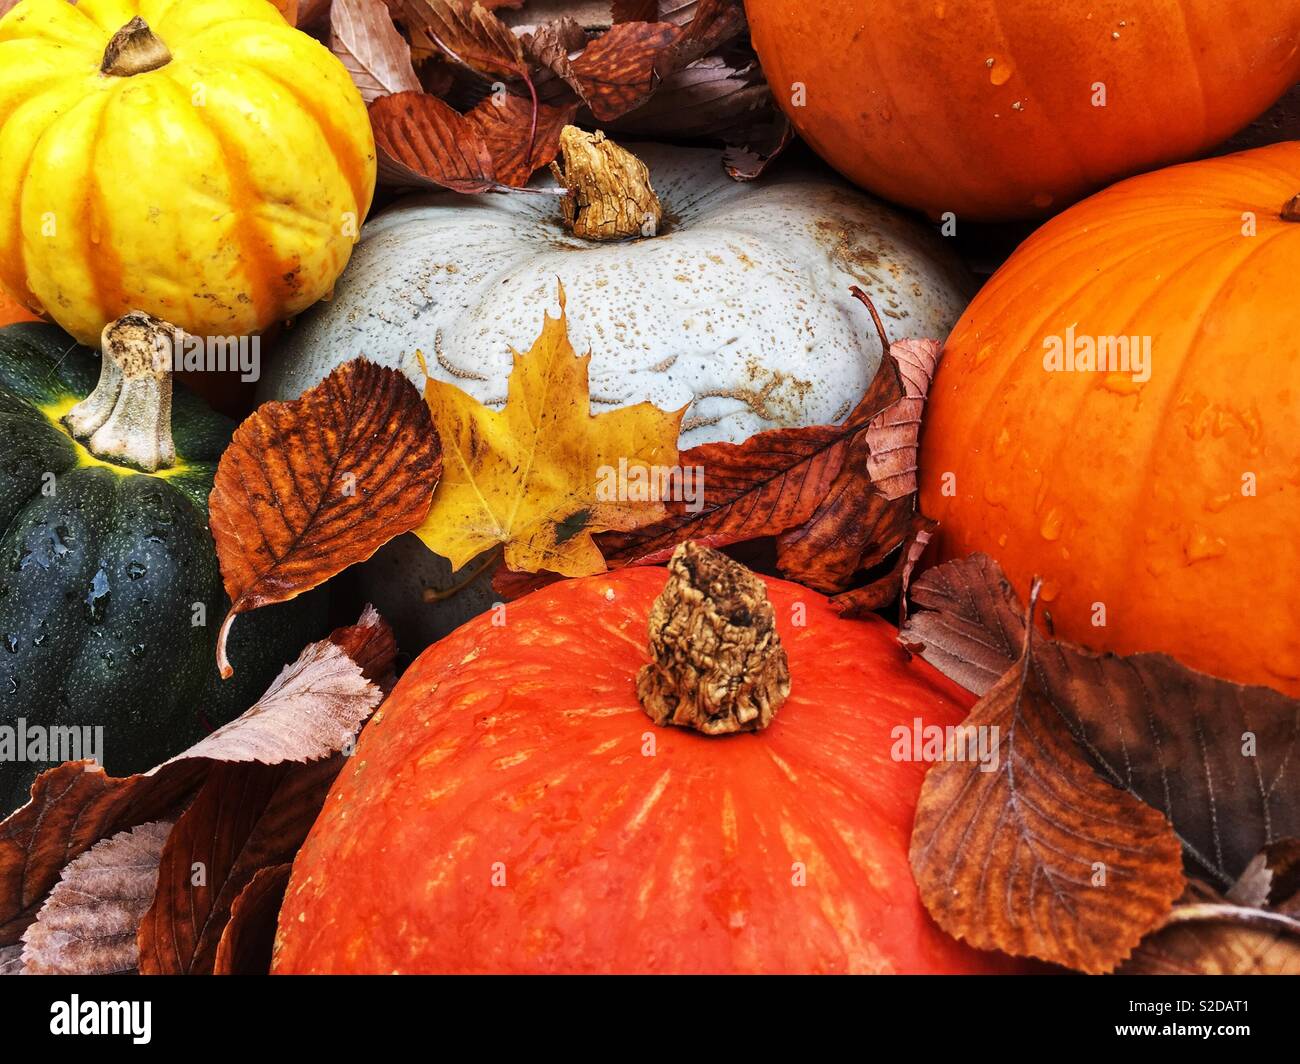 A variety of colourful pumpkins winter squash and gourds surrounded by fallen autumn leaves Stock Photo